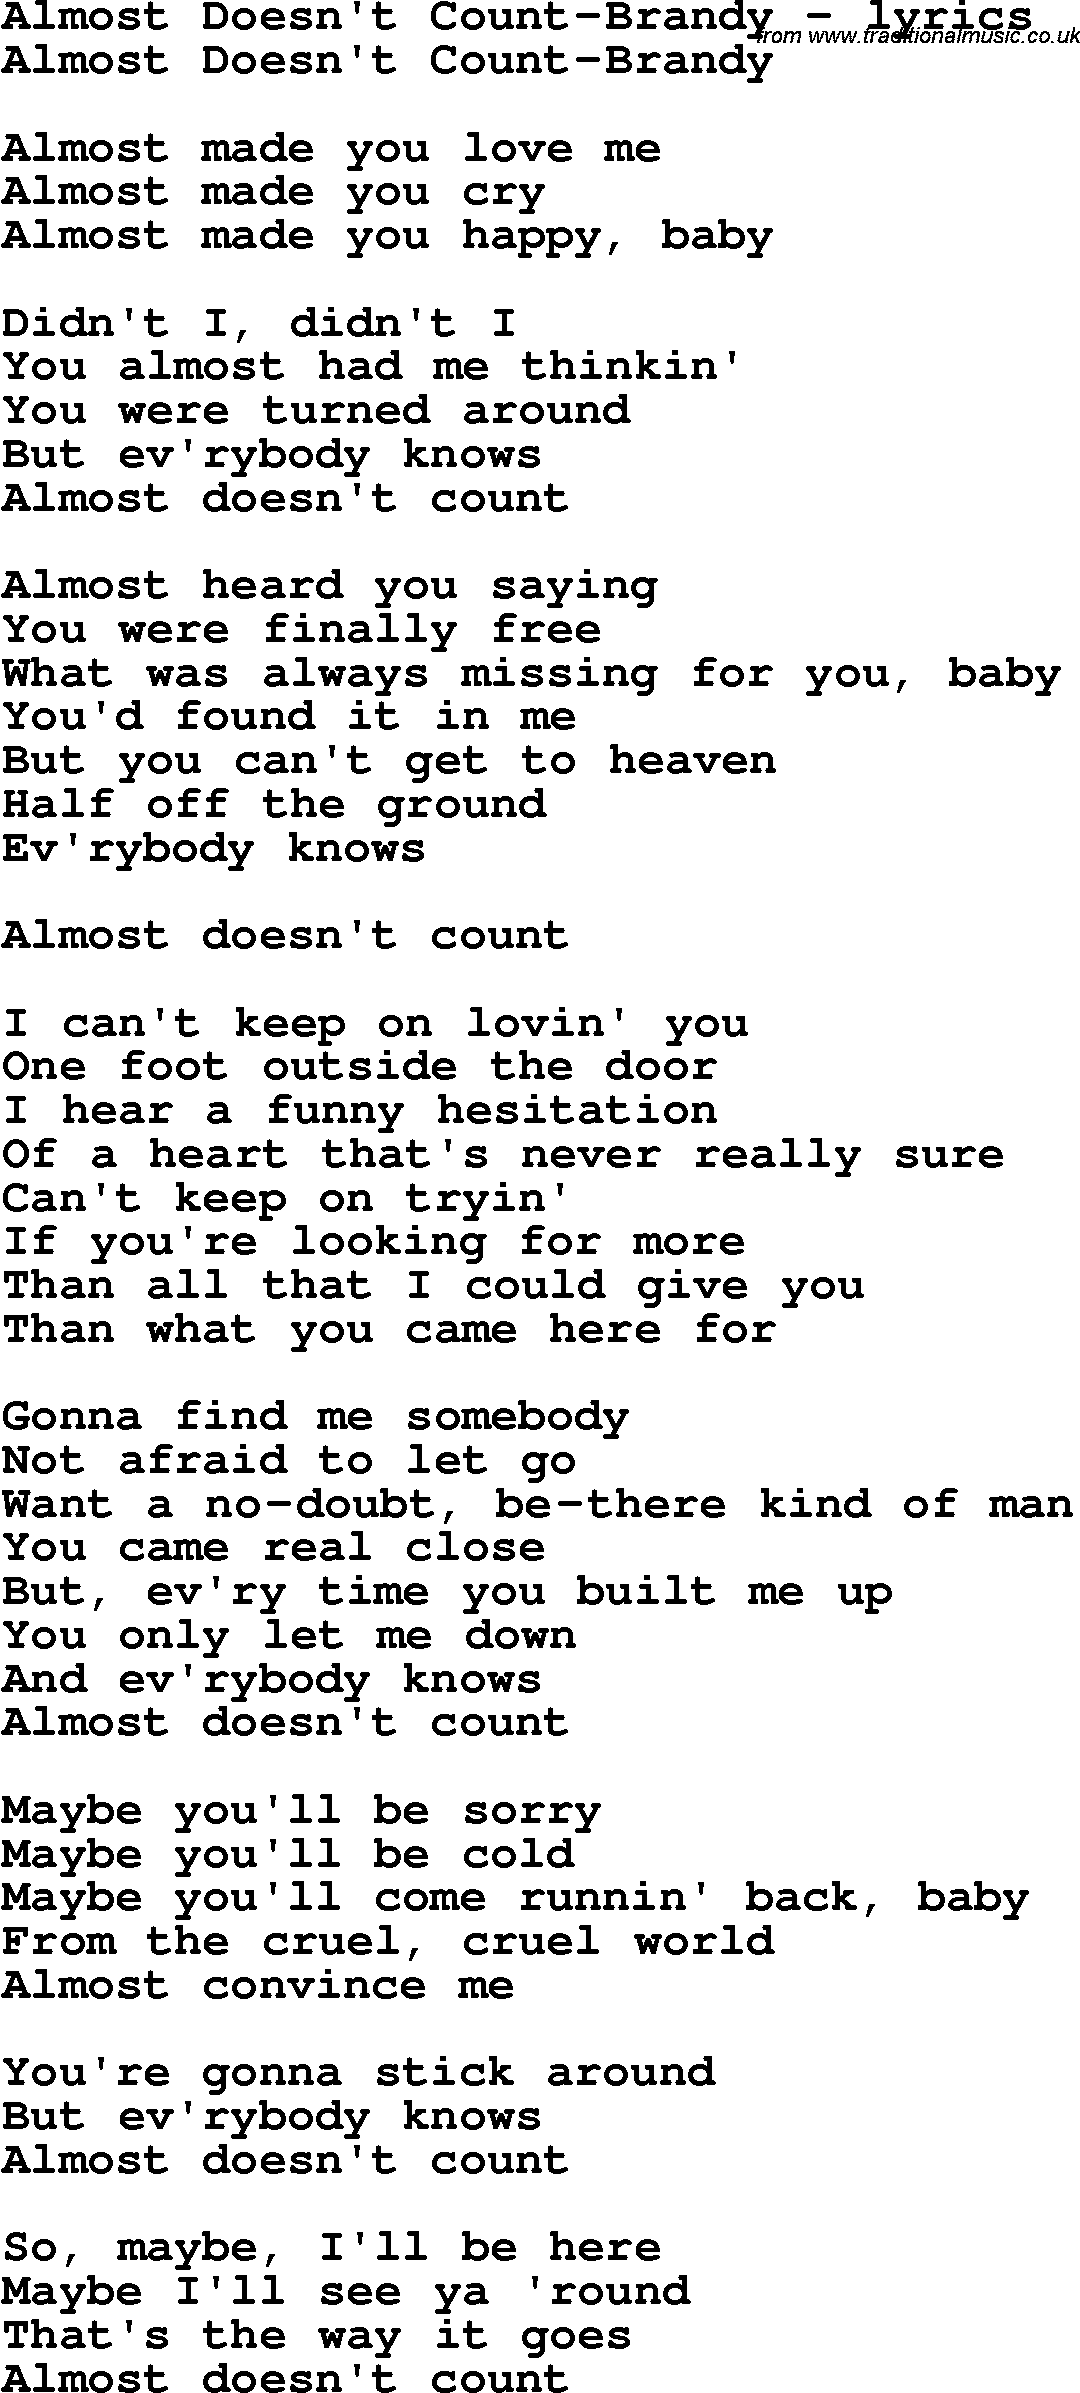 Love Song Lyrics for: Almost Doesn't Count-Brandy